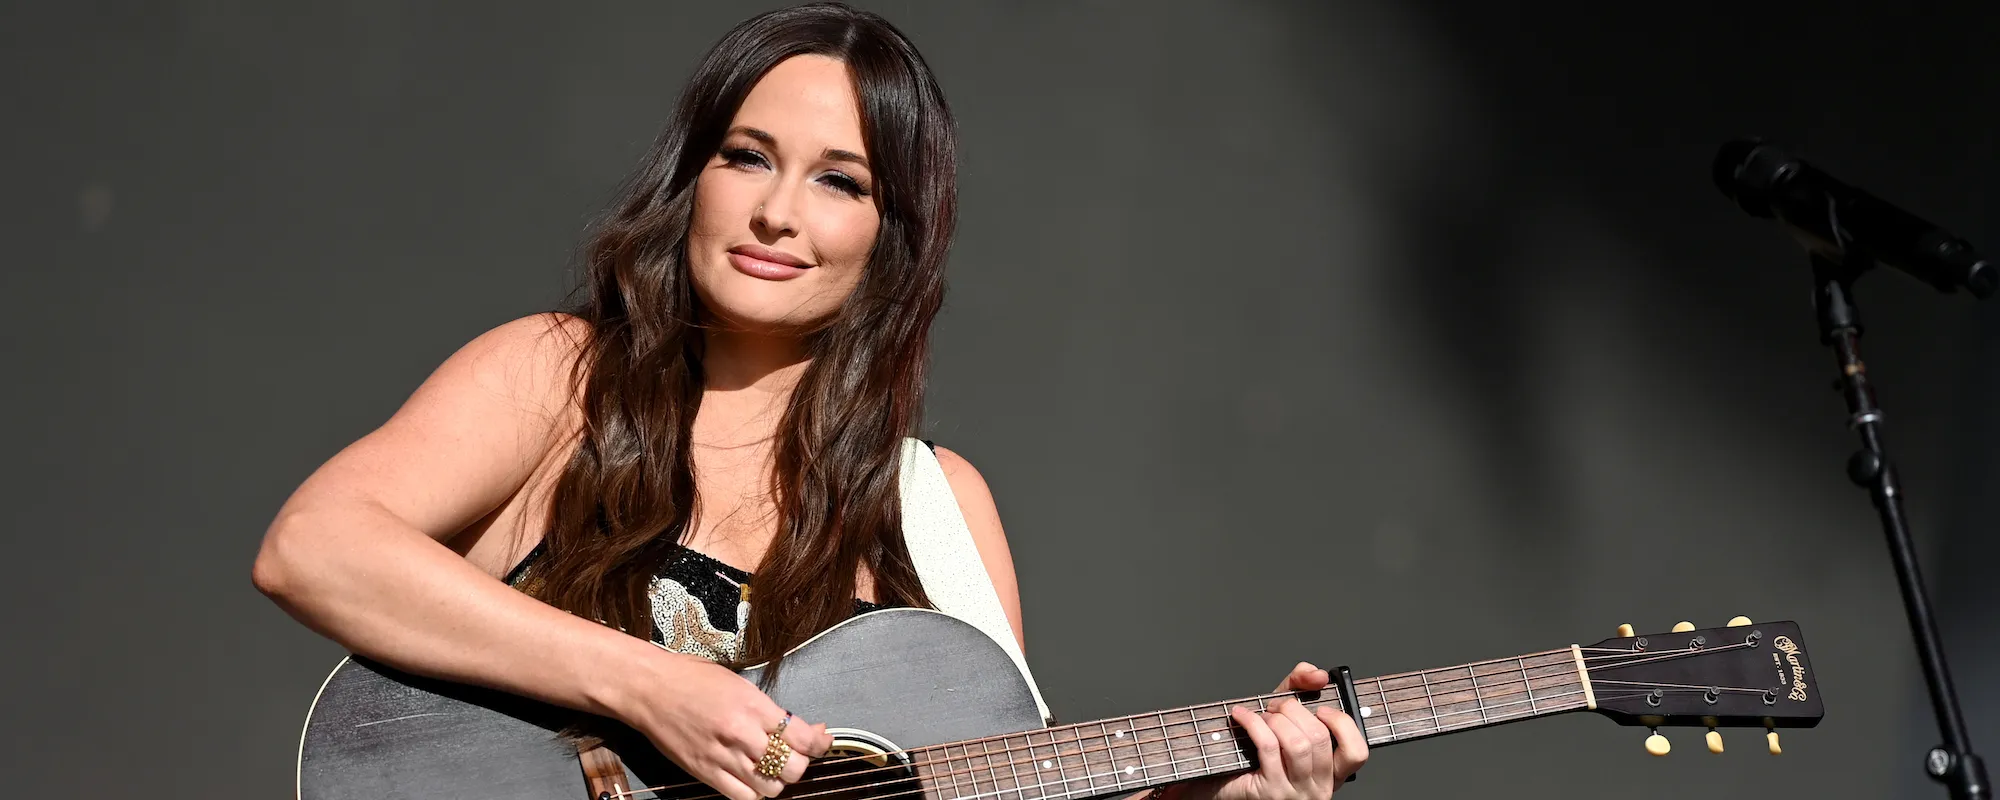 Behind the Meaning of “Wonder Woman” by Kacey Musgraves